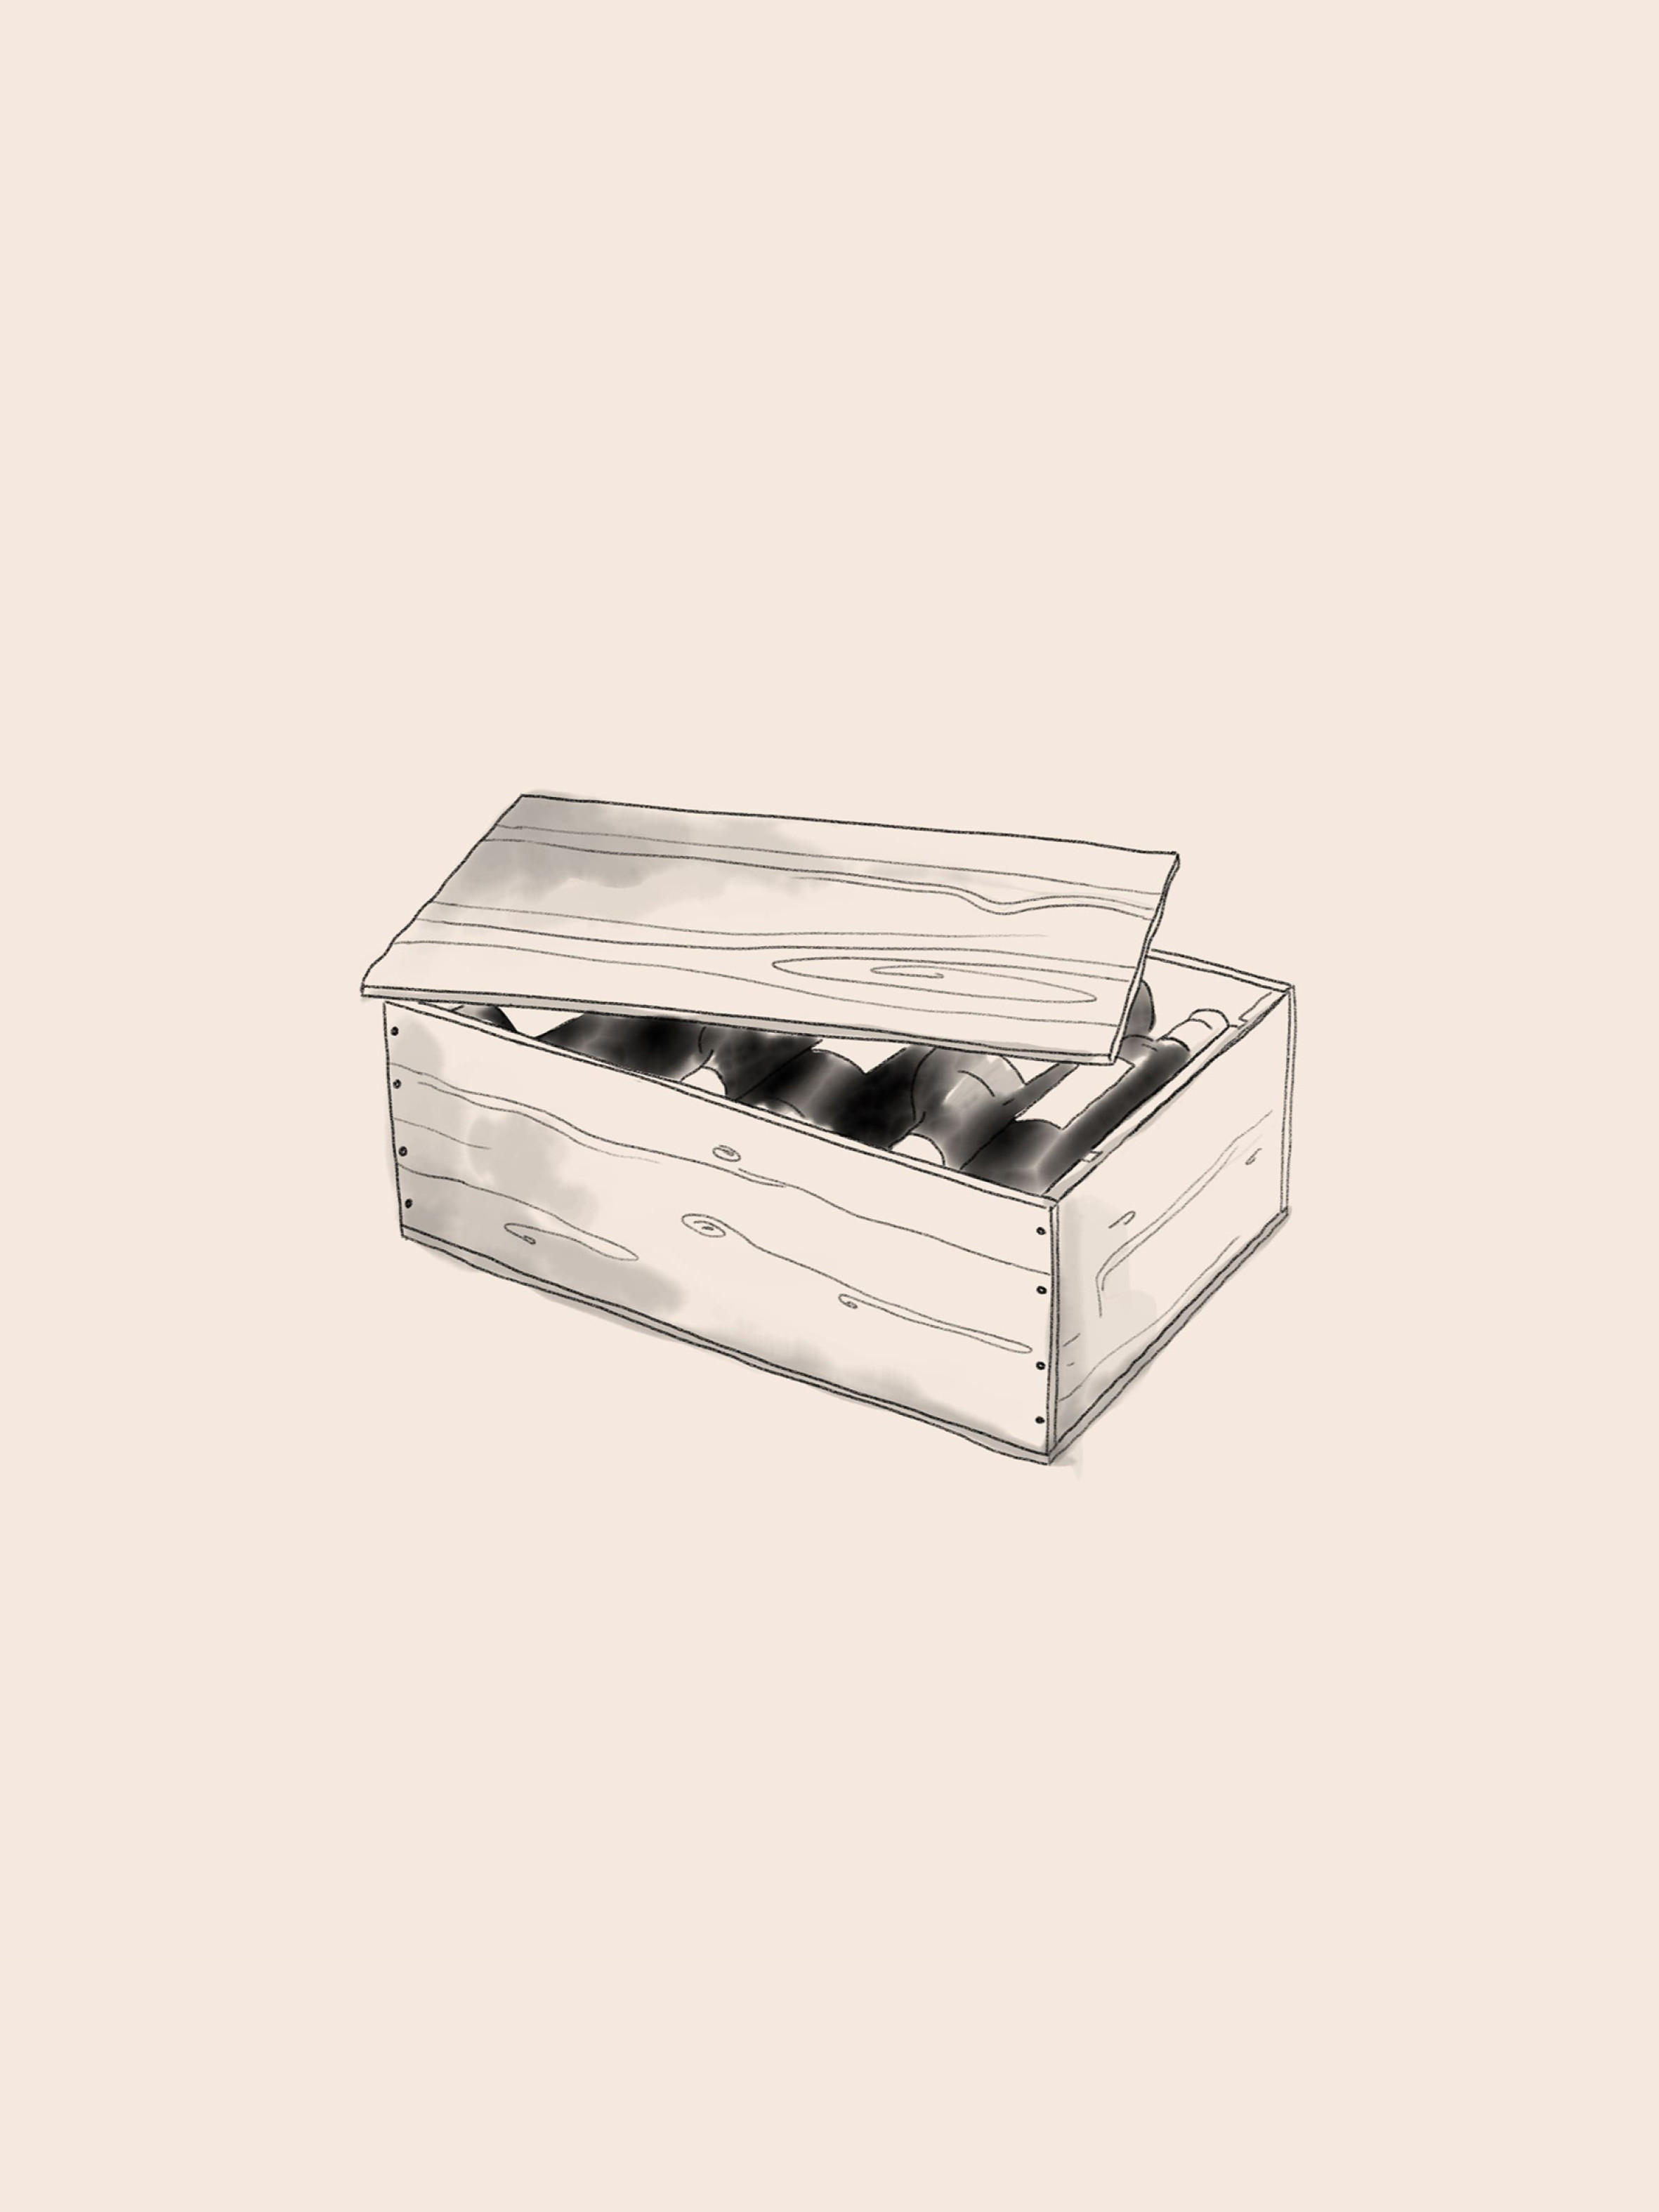 Illustration of a wooden wine box